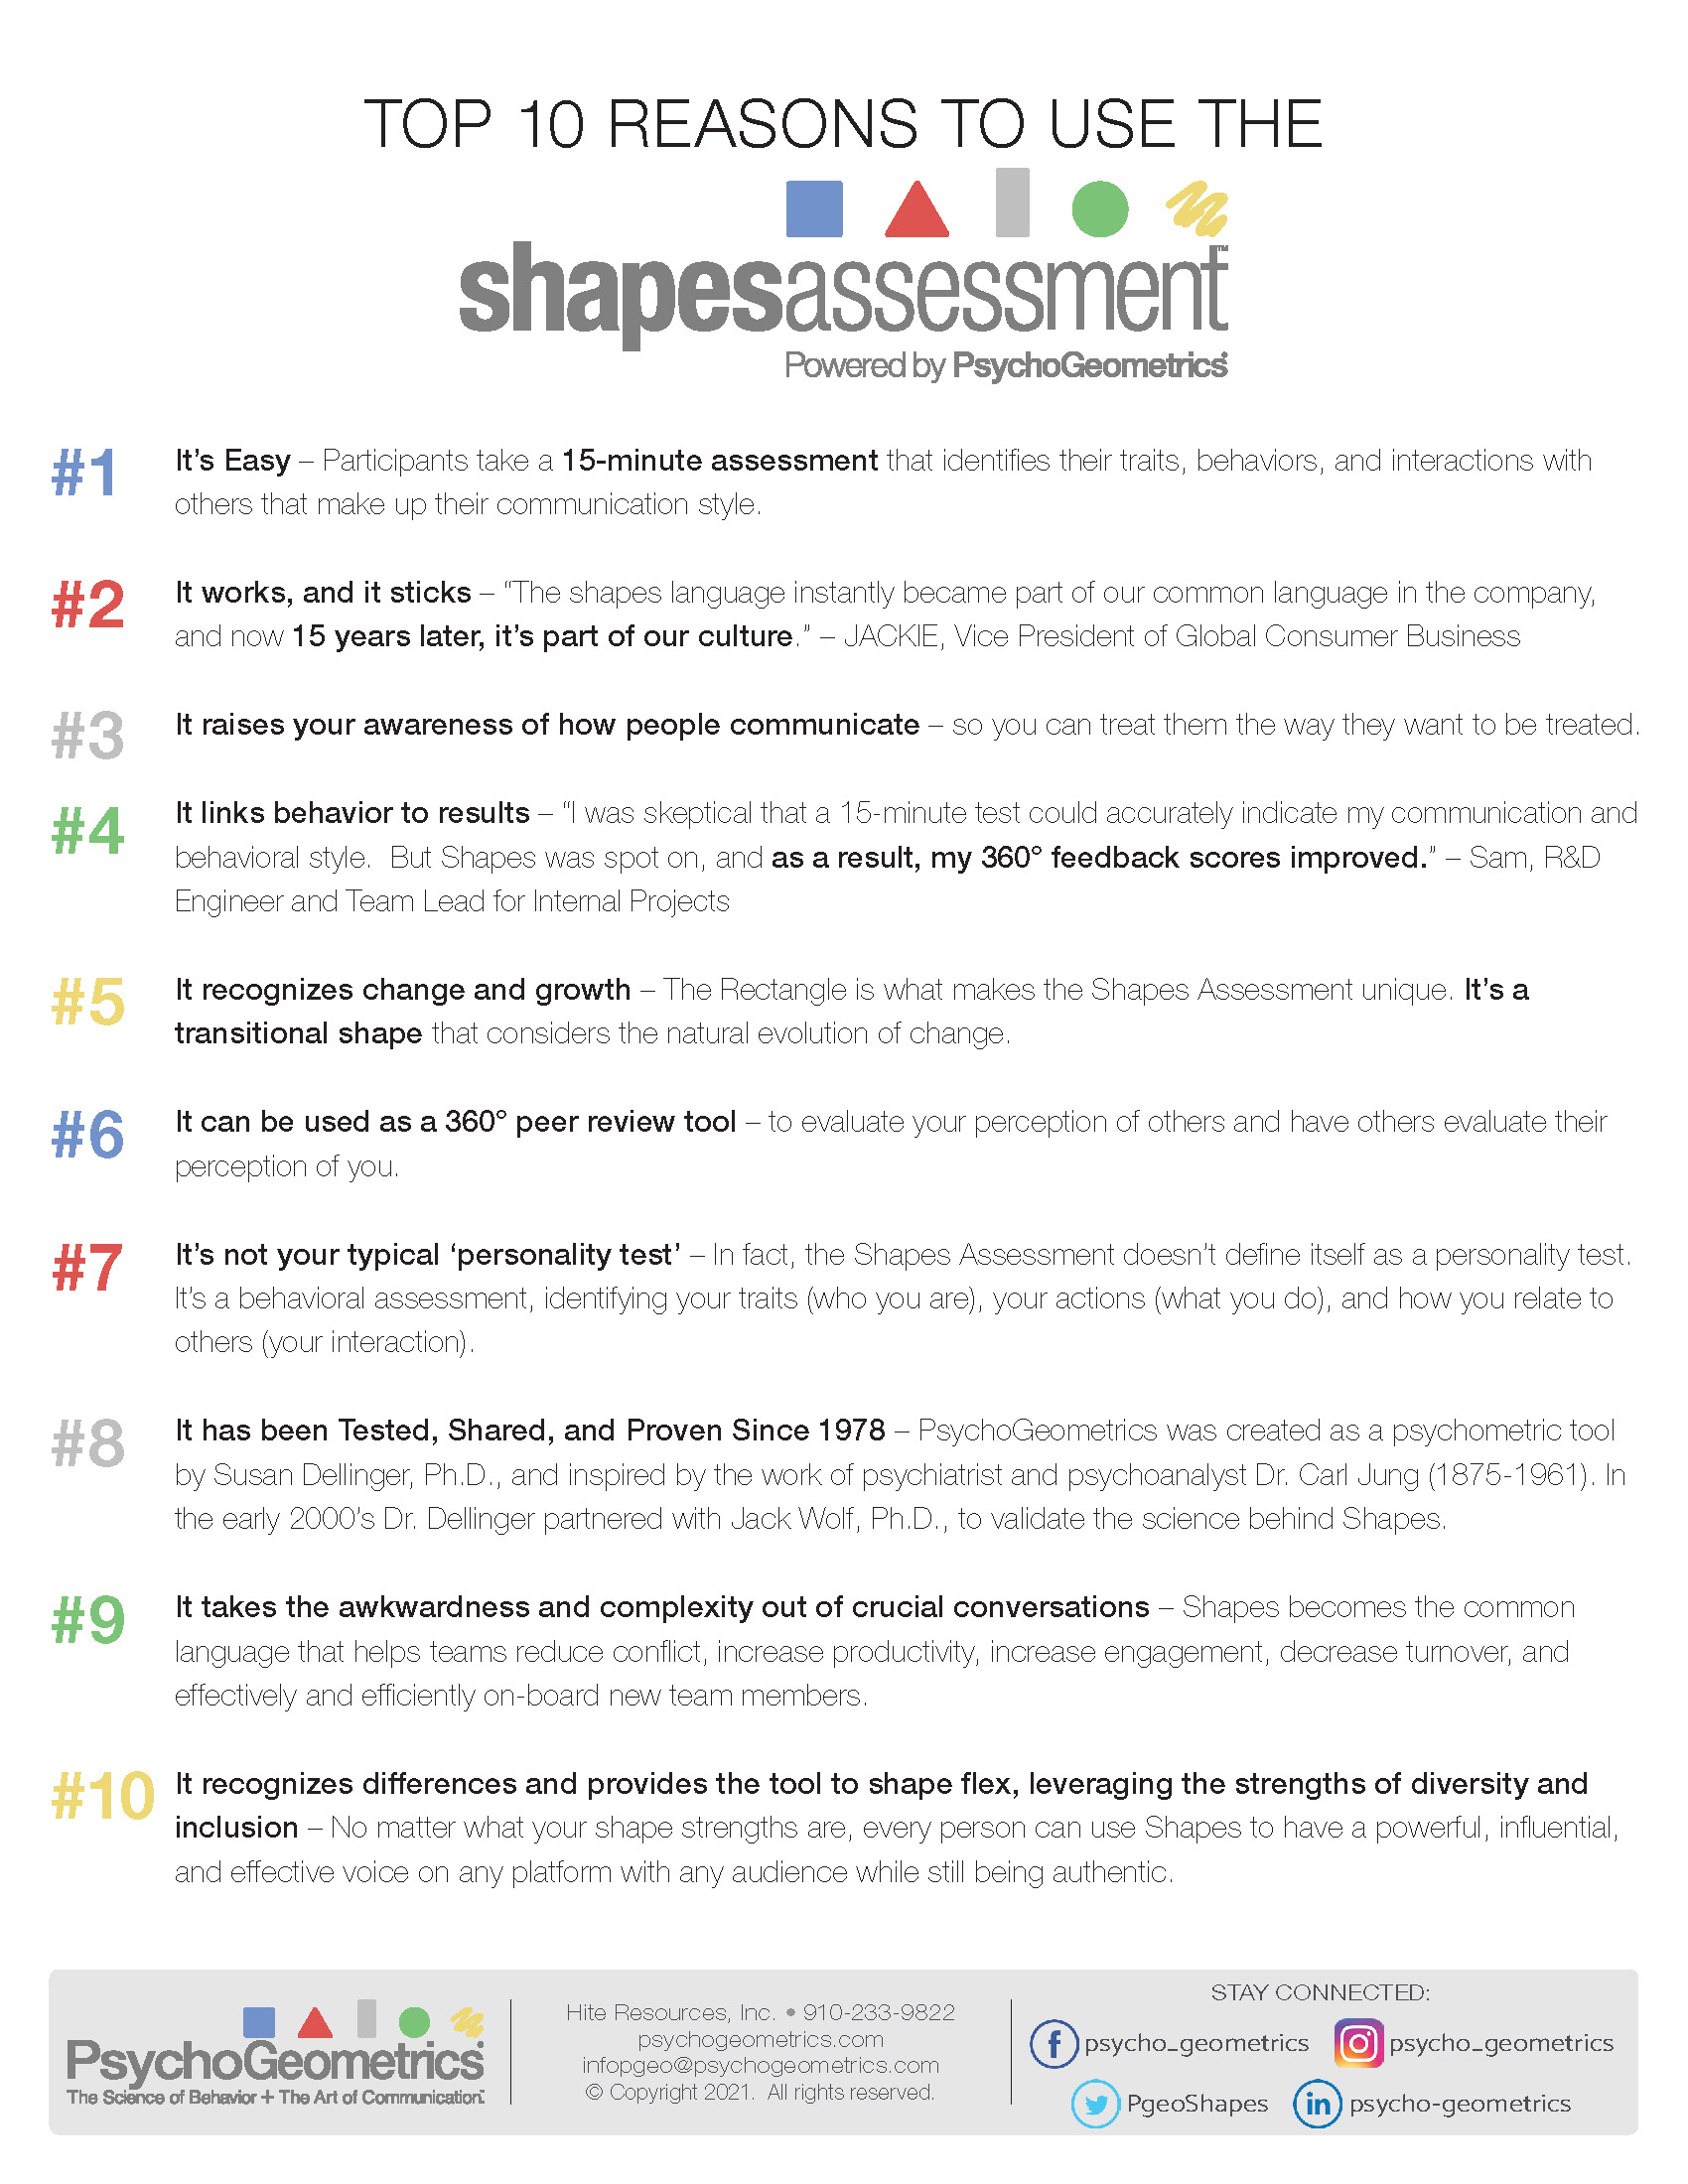 Top 10 Reasons to Use Shapes Assessment - 1 page version